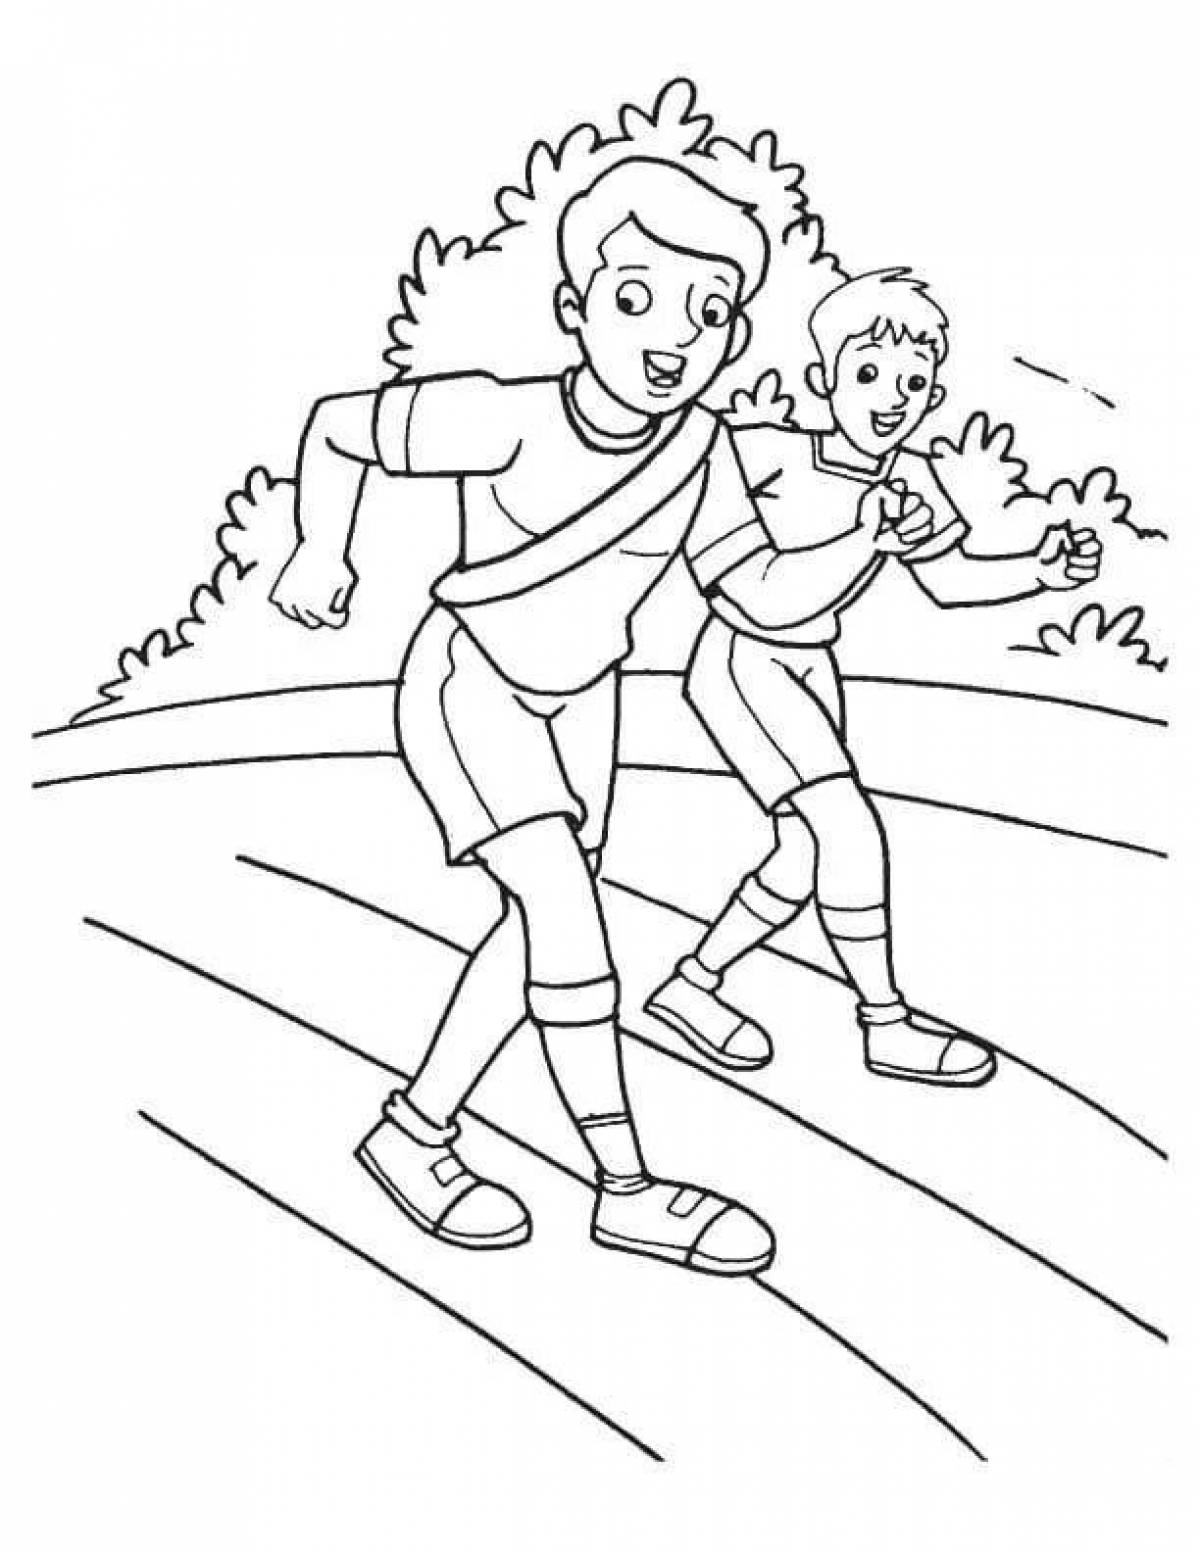 Colorful running coloring page